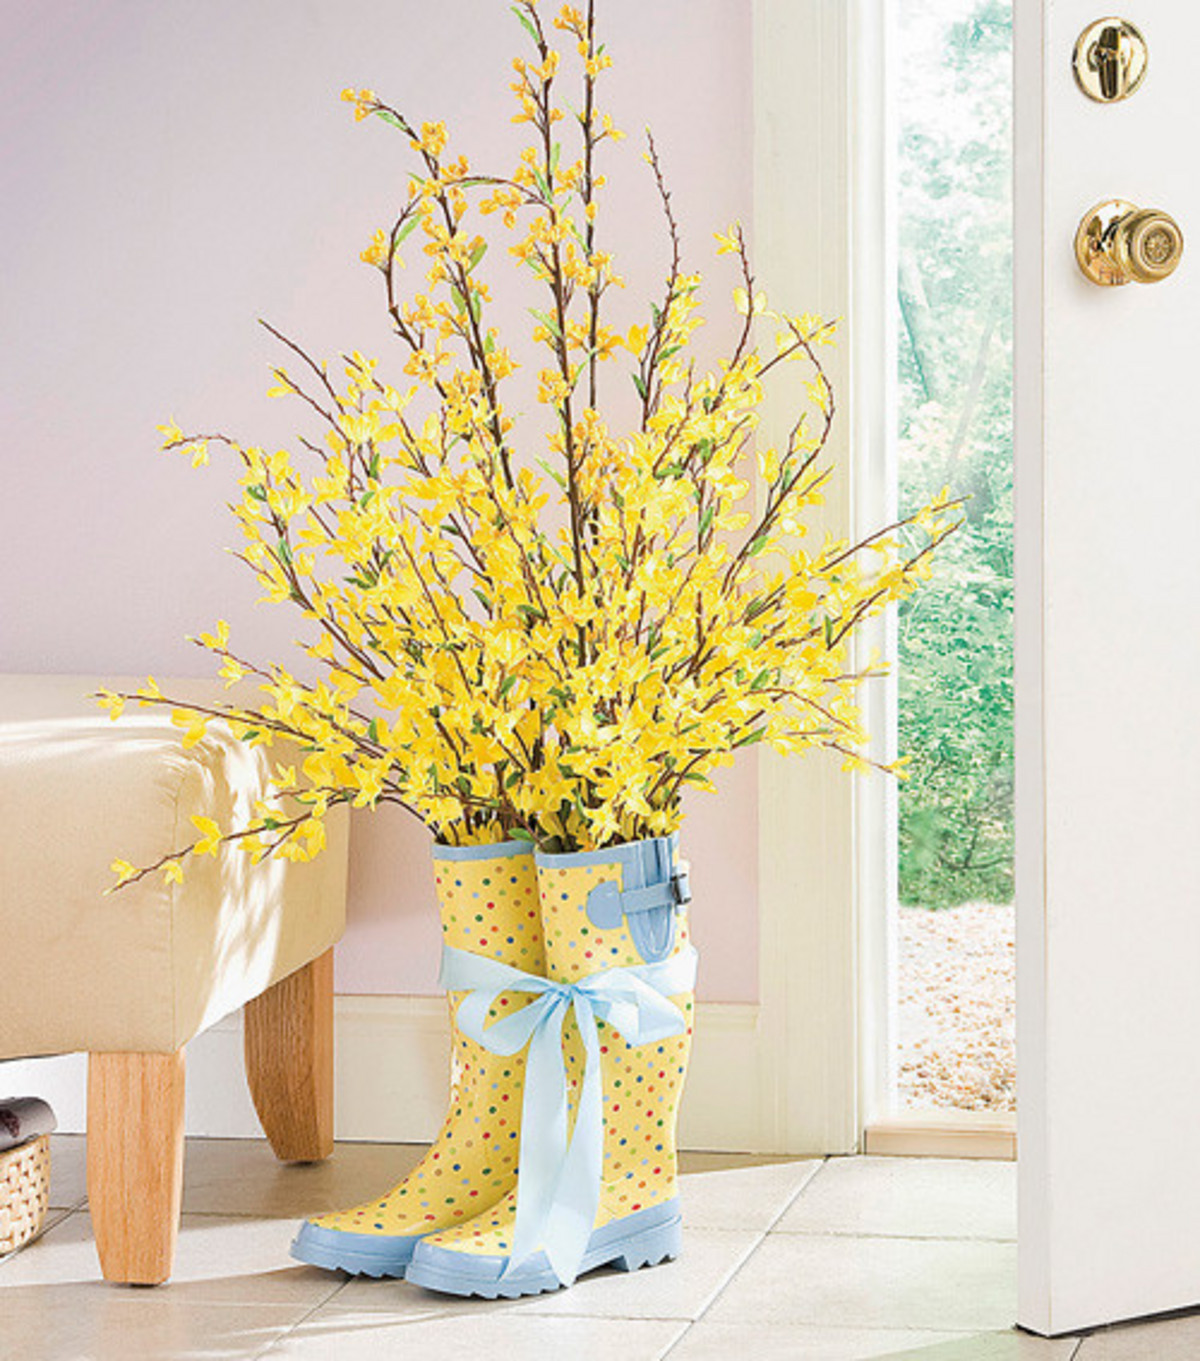 Spring Ideas Pictures
 7 Creative Decor Ideas for Spring and Summer ZING Blog